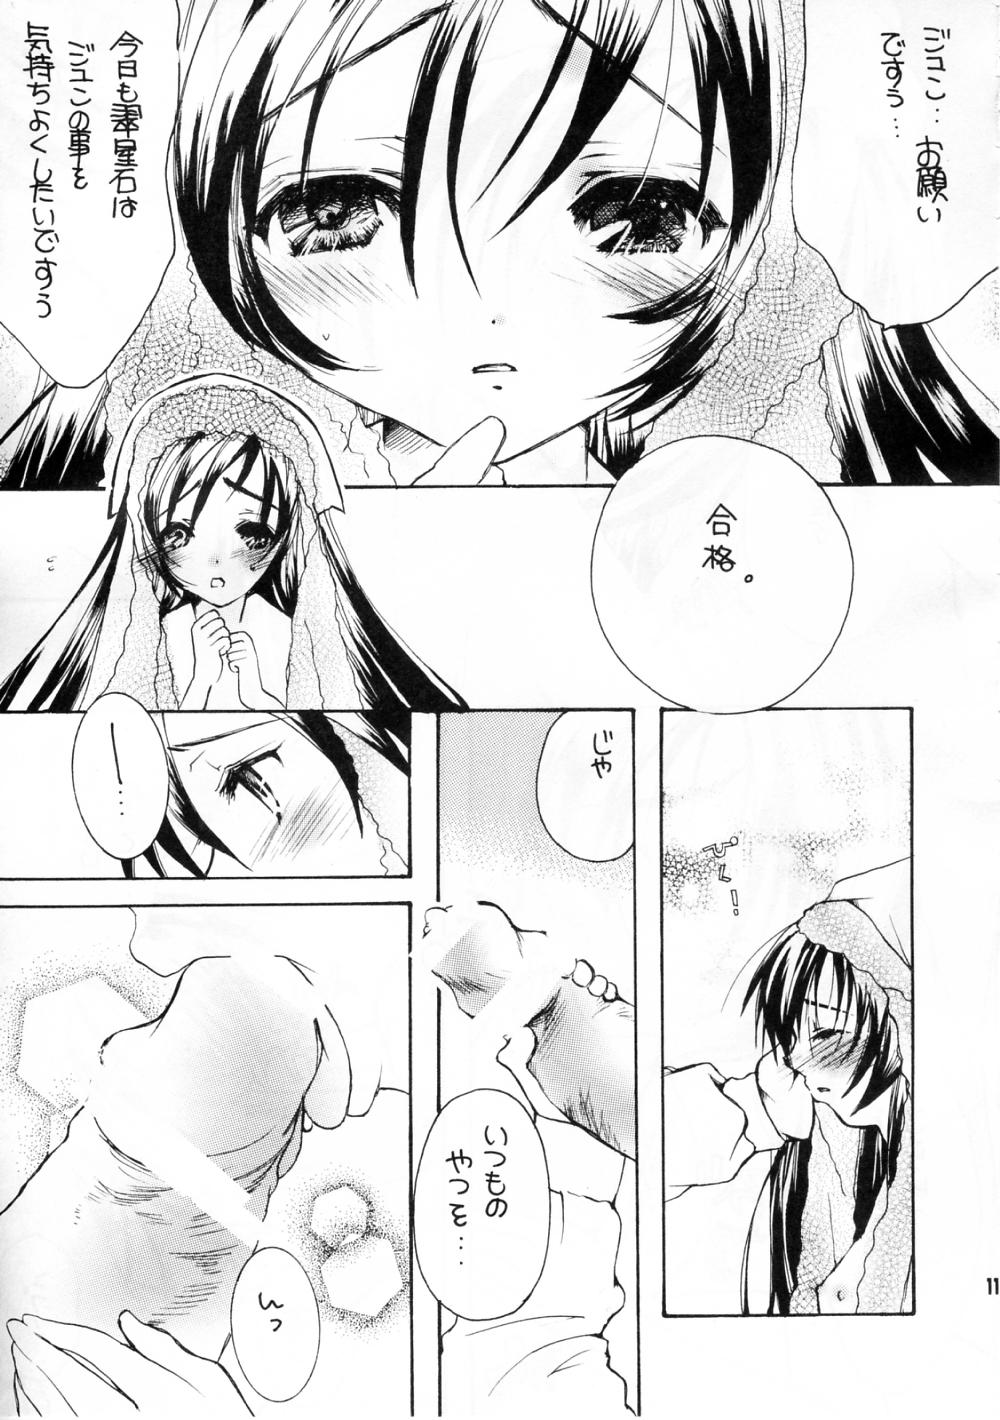 Cowgirl TWIST ROSES - Rozen maiden Sislovesme - Page 10